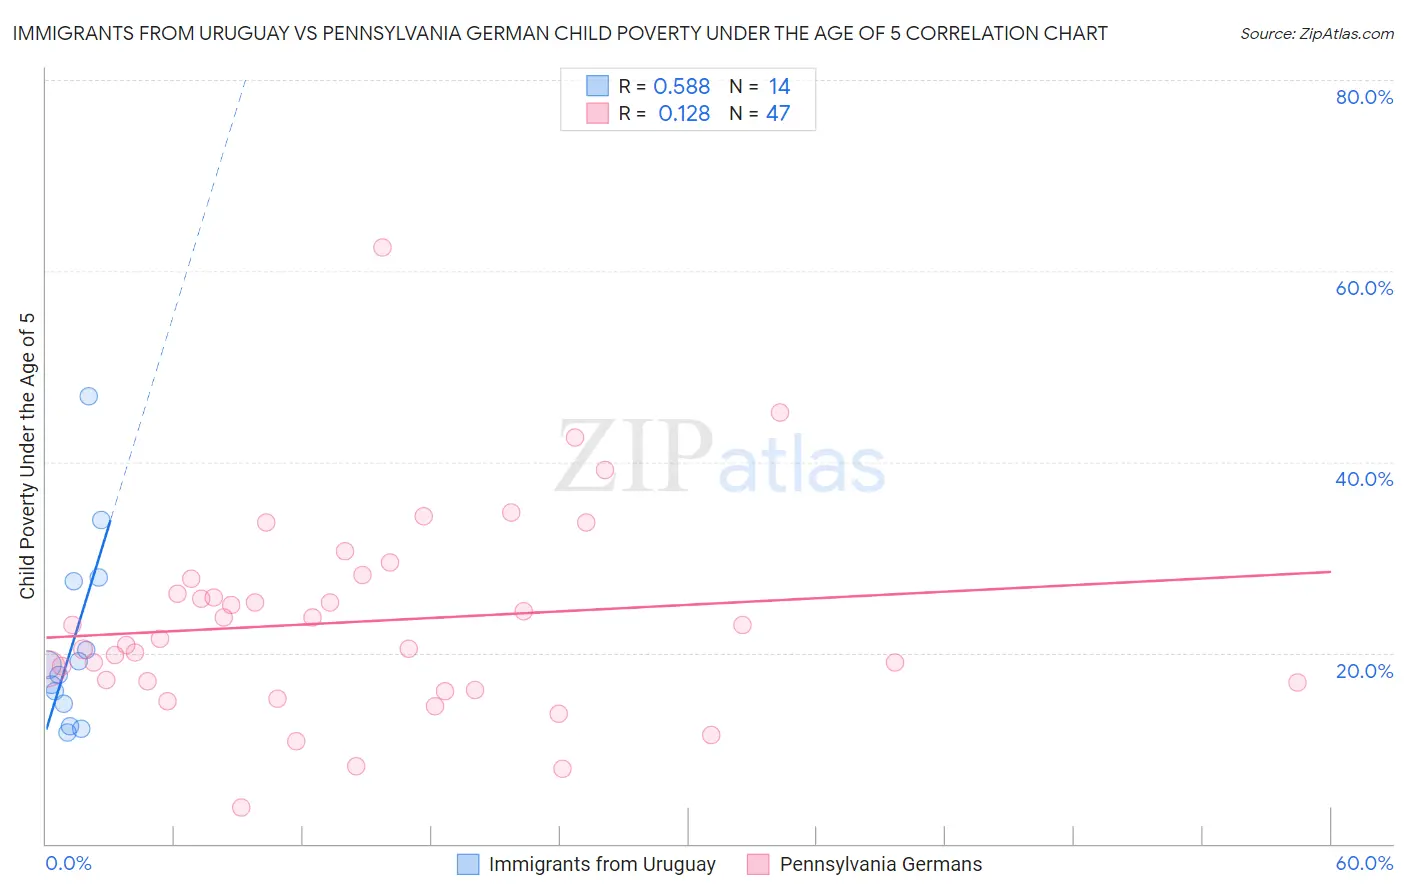 Immigrants from Uruguay vs Pennsylvania German Child Poverty Under the Age of 5